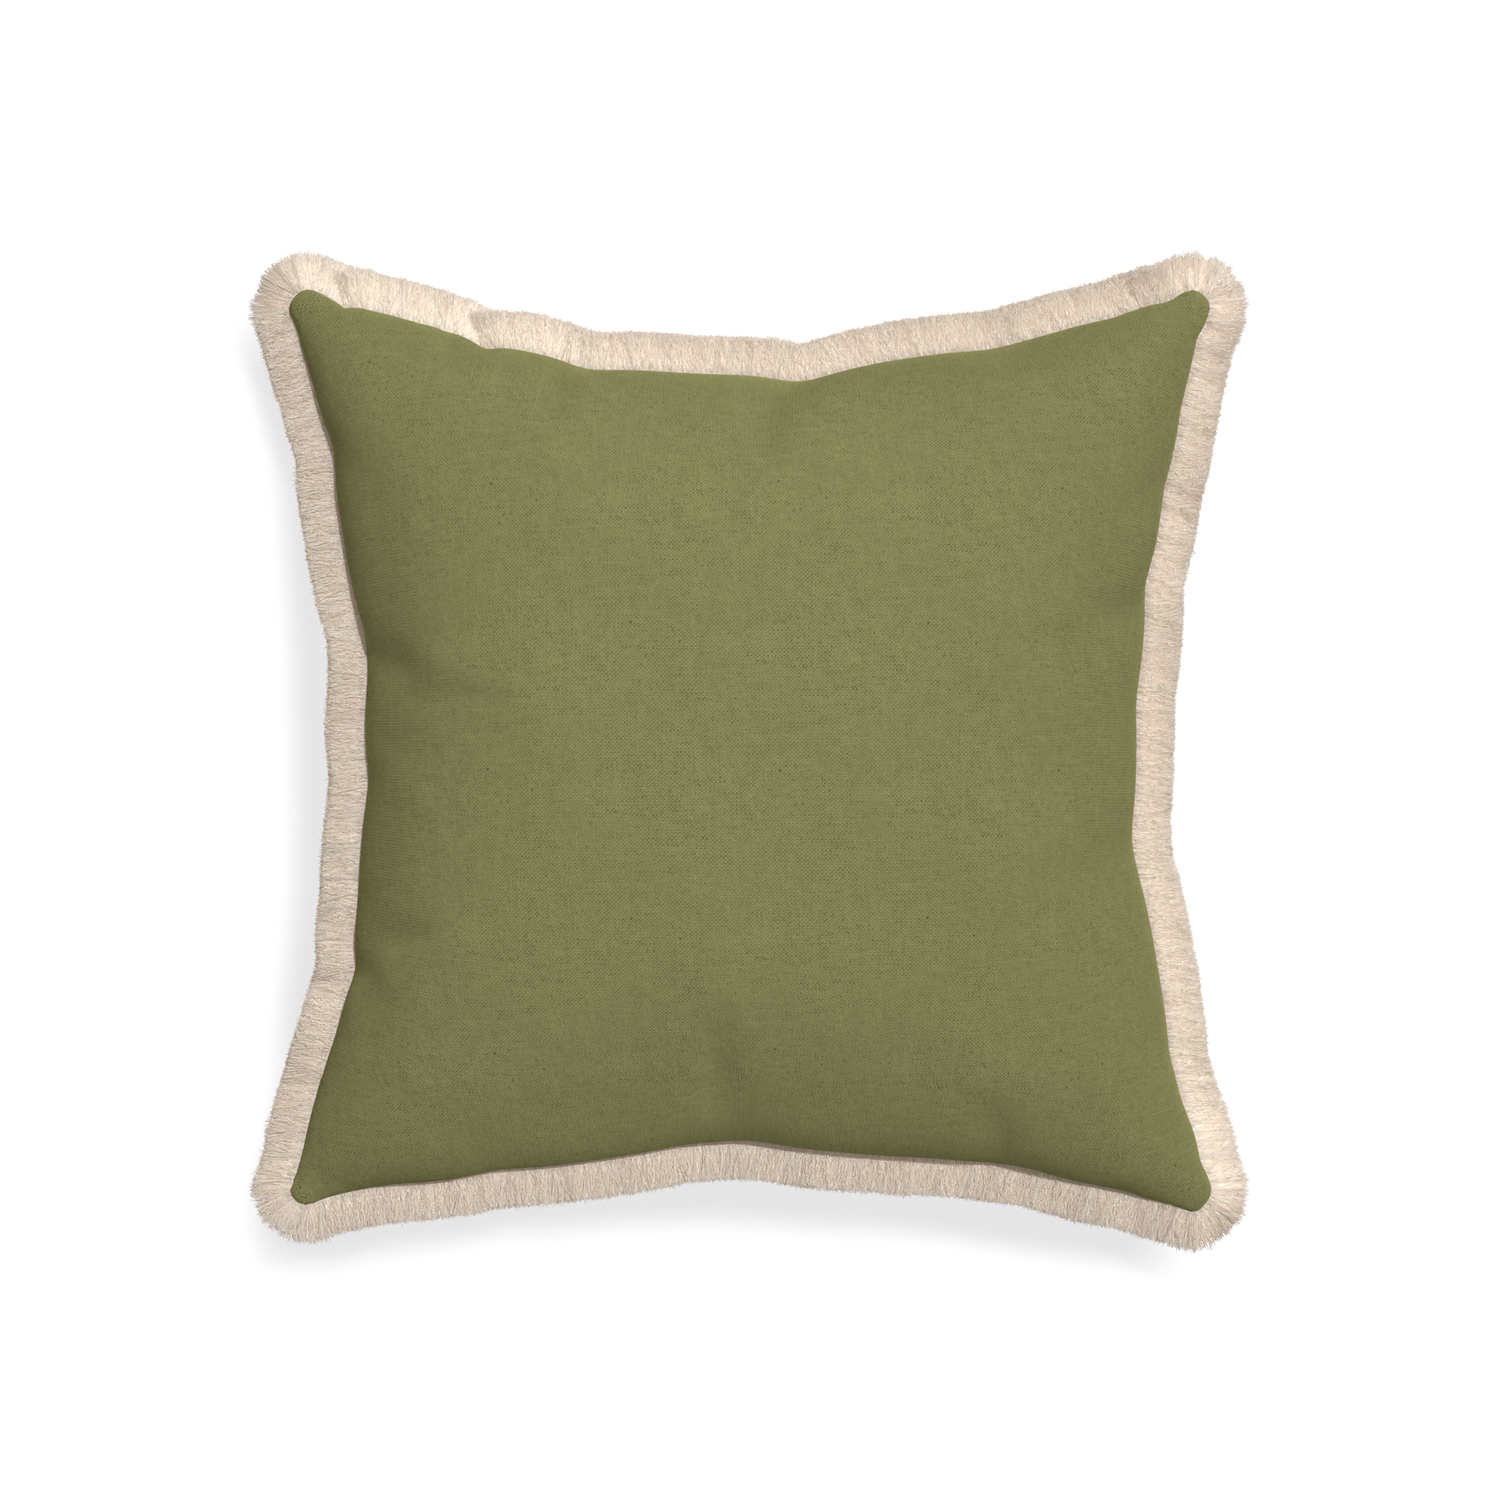 20-square moss custom moss greenpillow with cream fringe on white background